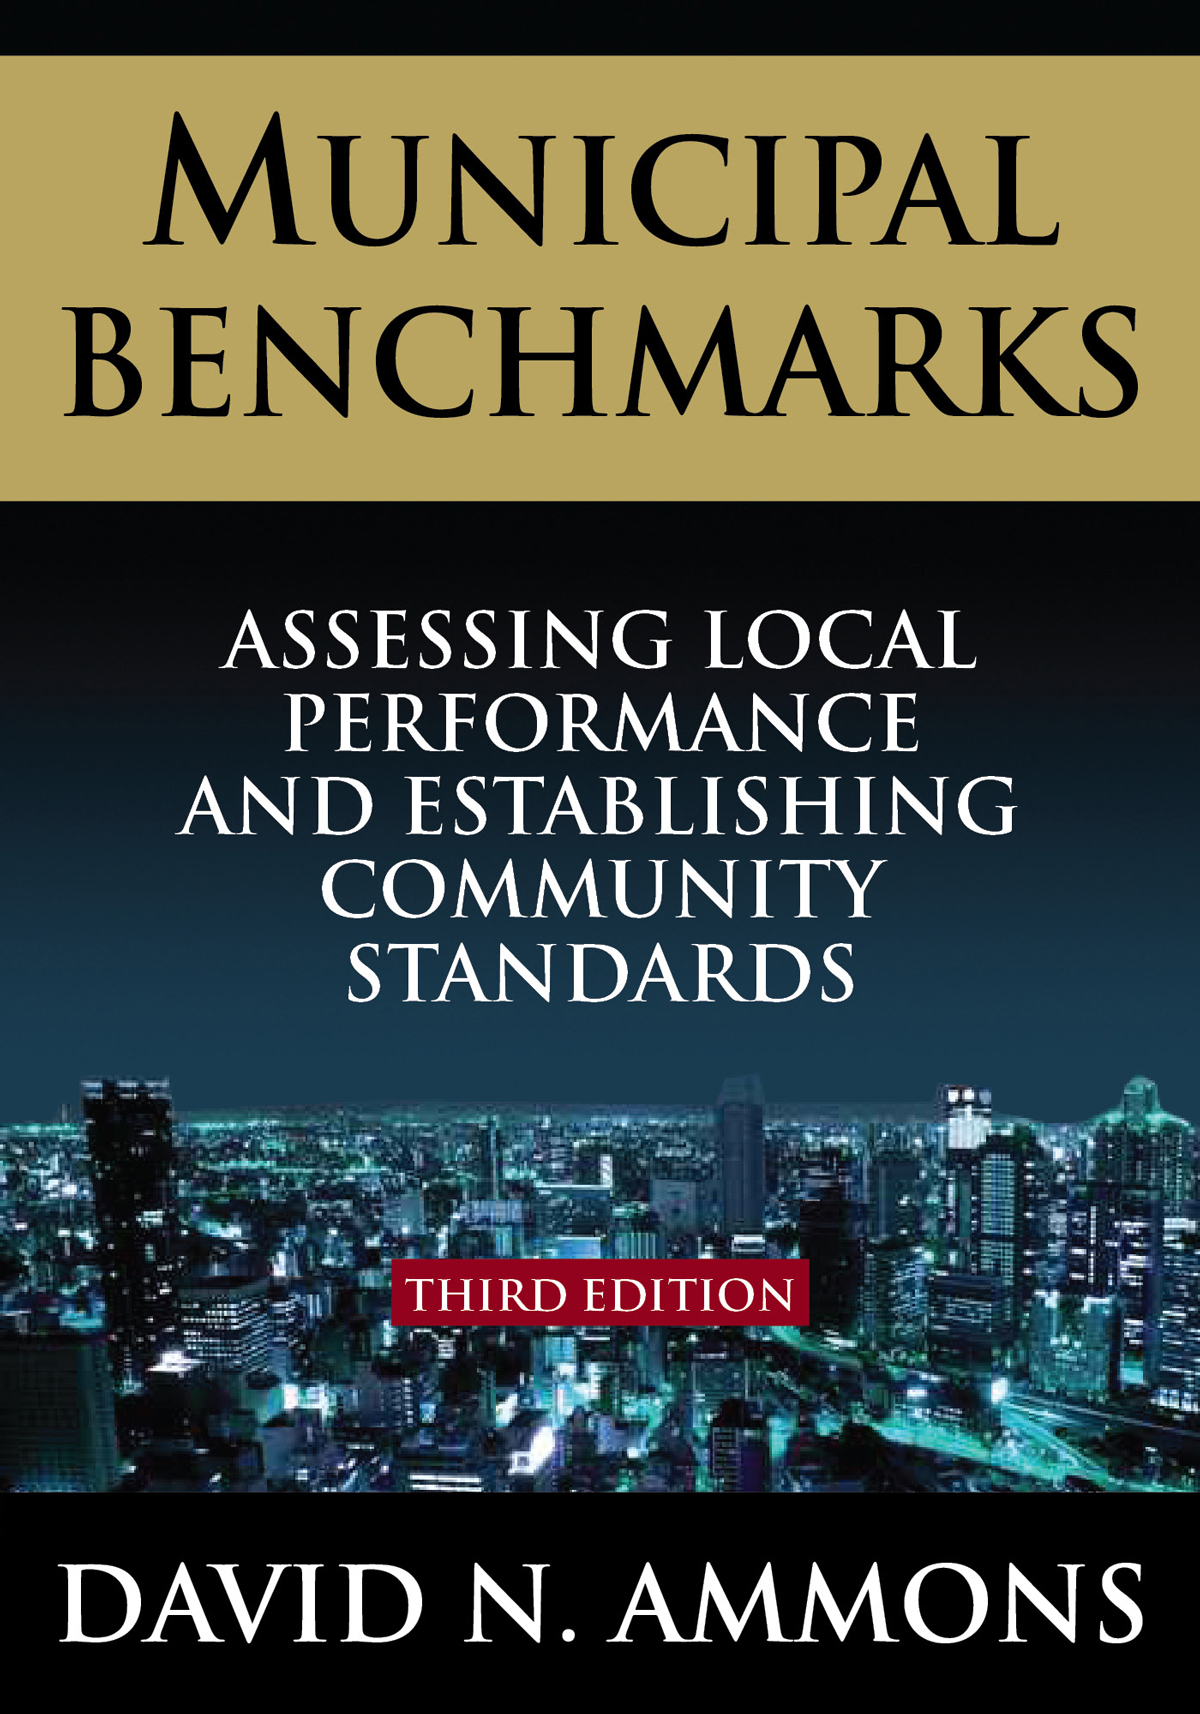 Cover image for Municipal Benchmarks: Assessing Local Performance and Establishing Community Standards, Third Edition